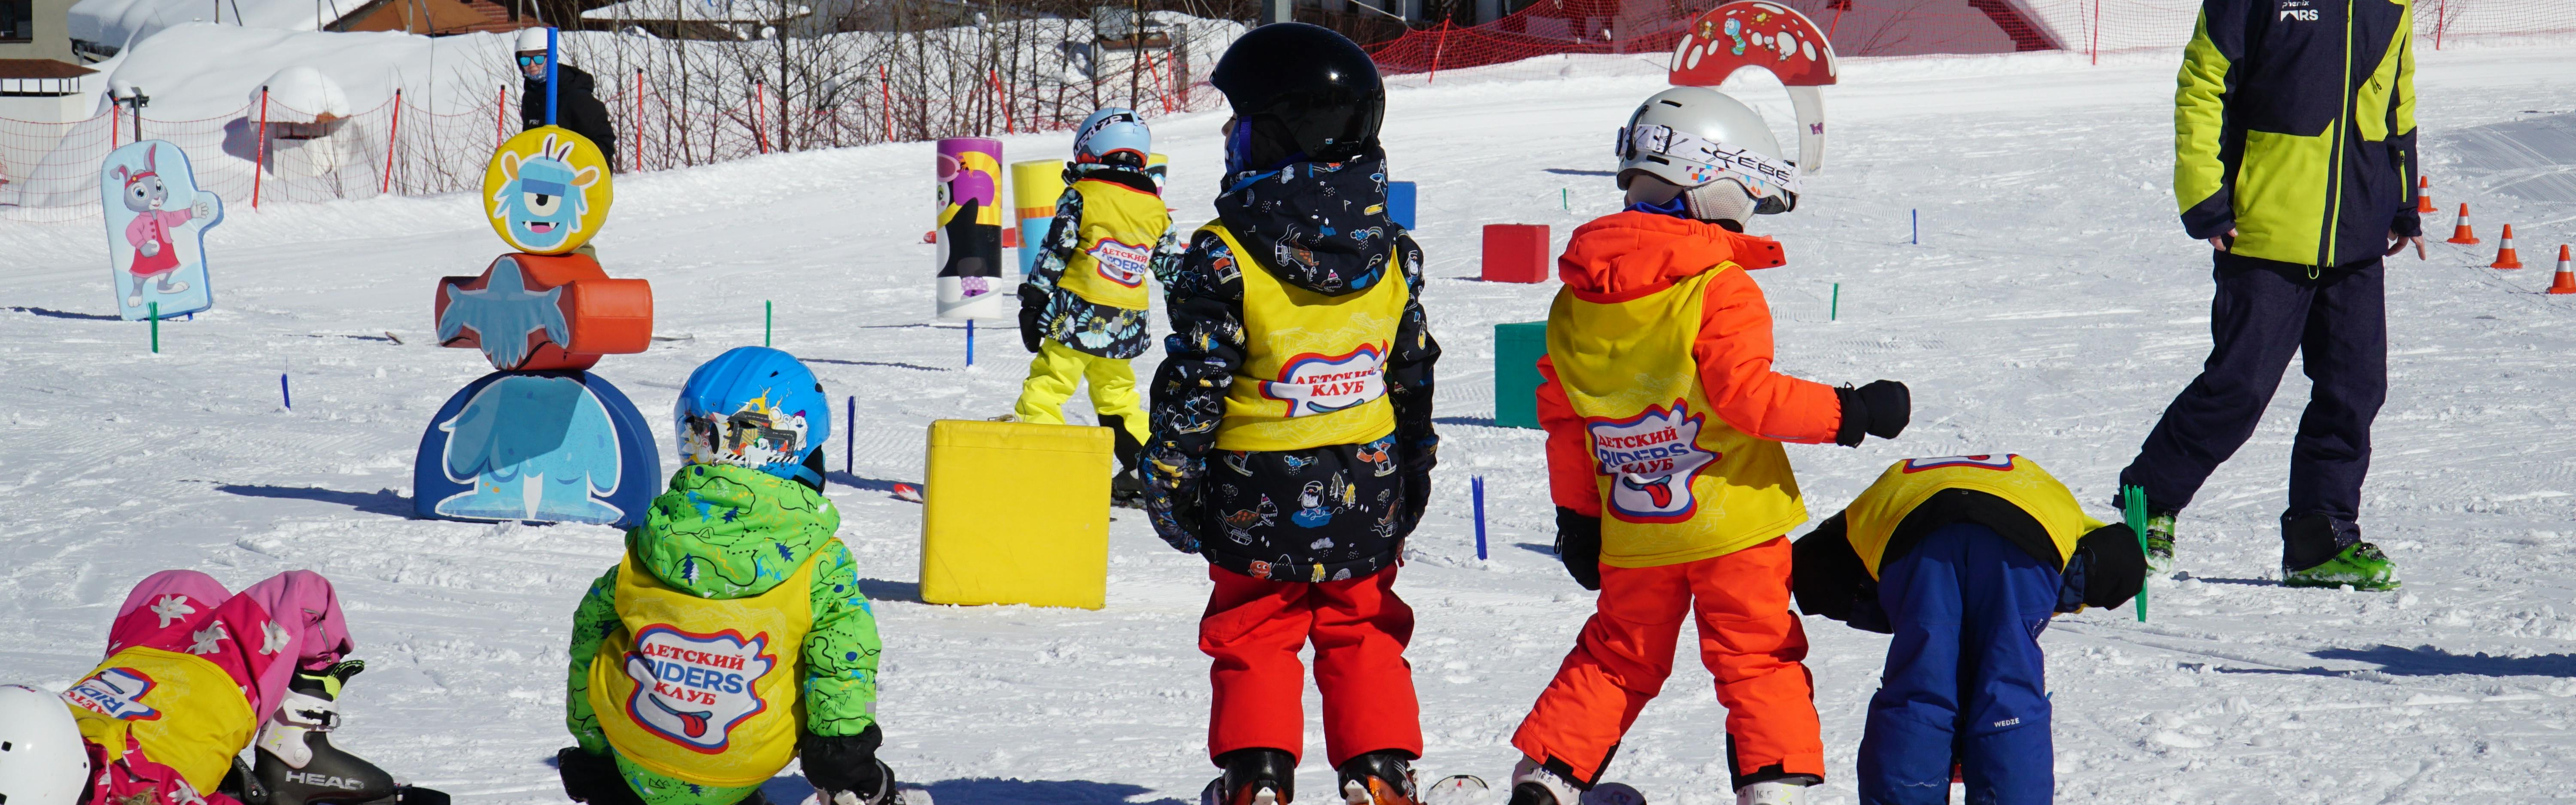 Several children are on snowboards in an obstacle course. They are all wearing the same shirt over their jacket and look like they are learning. There is an adult aged teacher standing in the background who looks like he is helping them learn how to snowboard. 